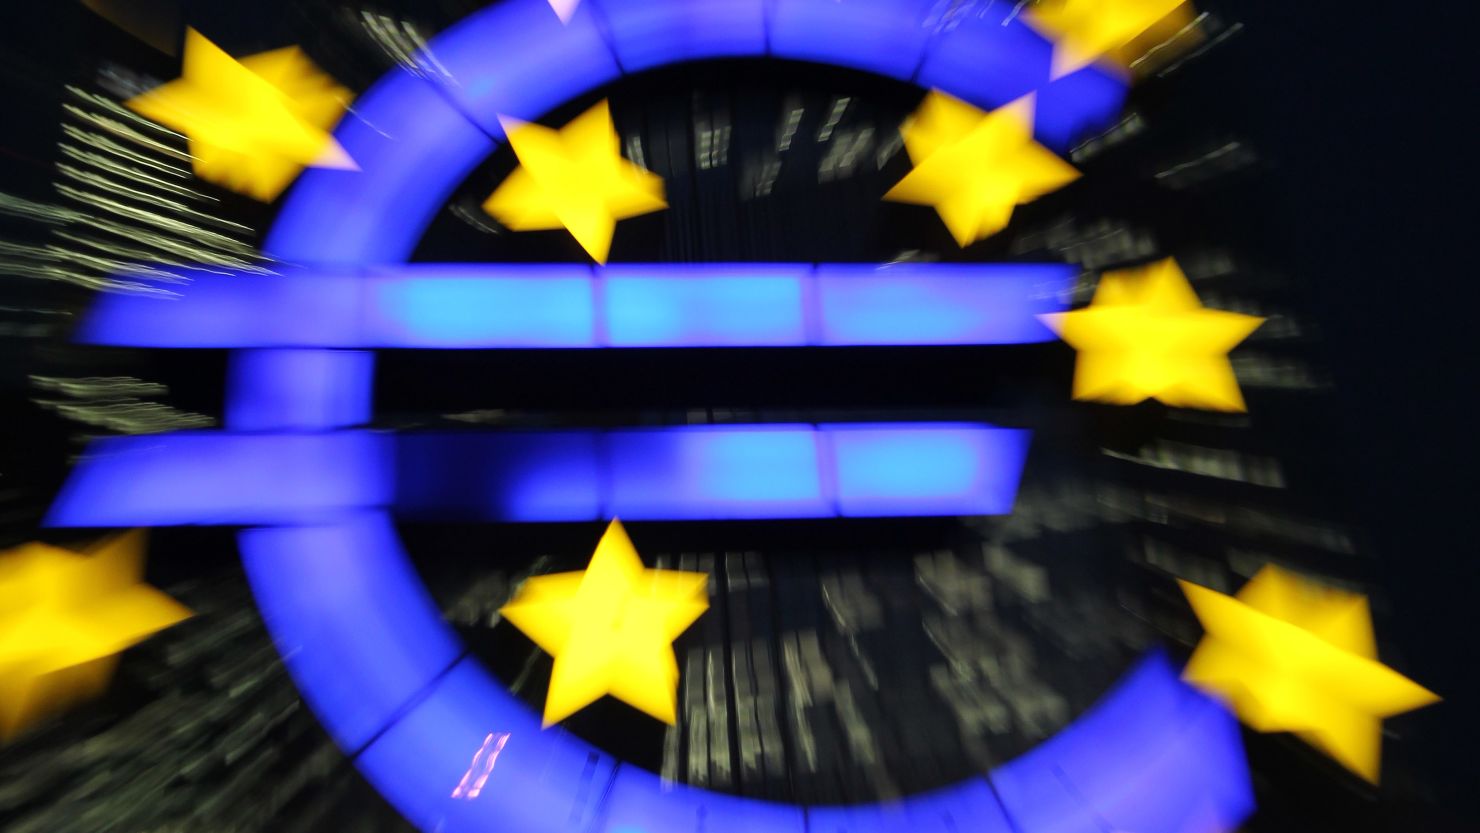 The logo of the Eurozone currency is displayed in front of the European Central Bank in Frankfurt, Germany.